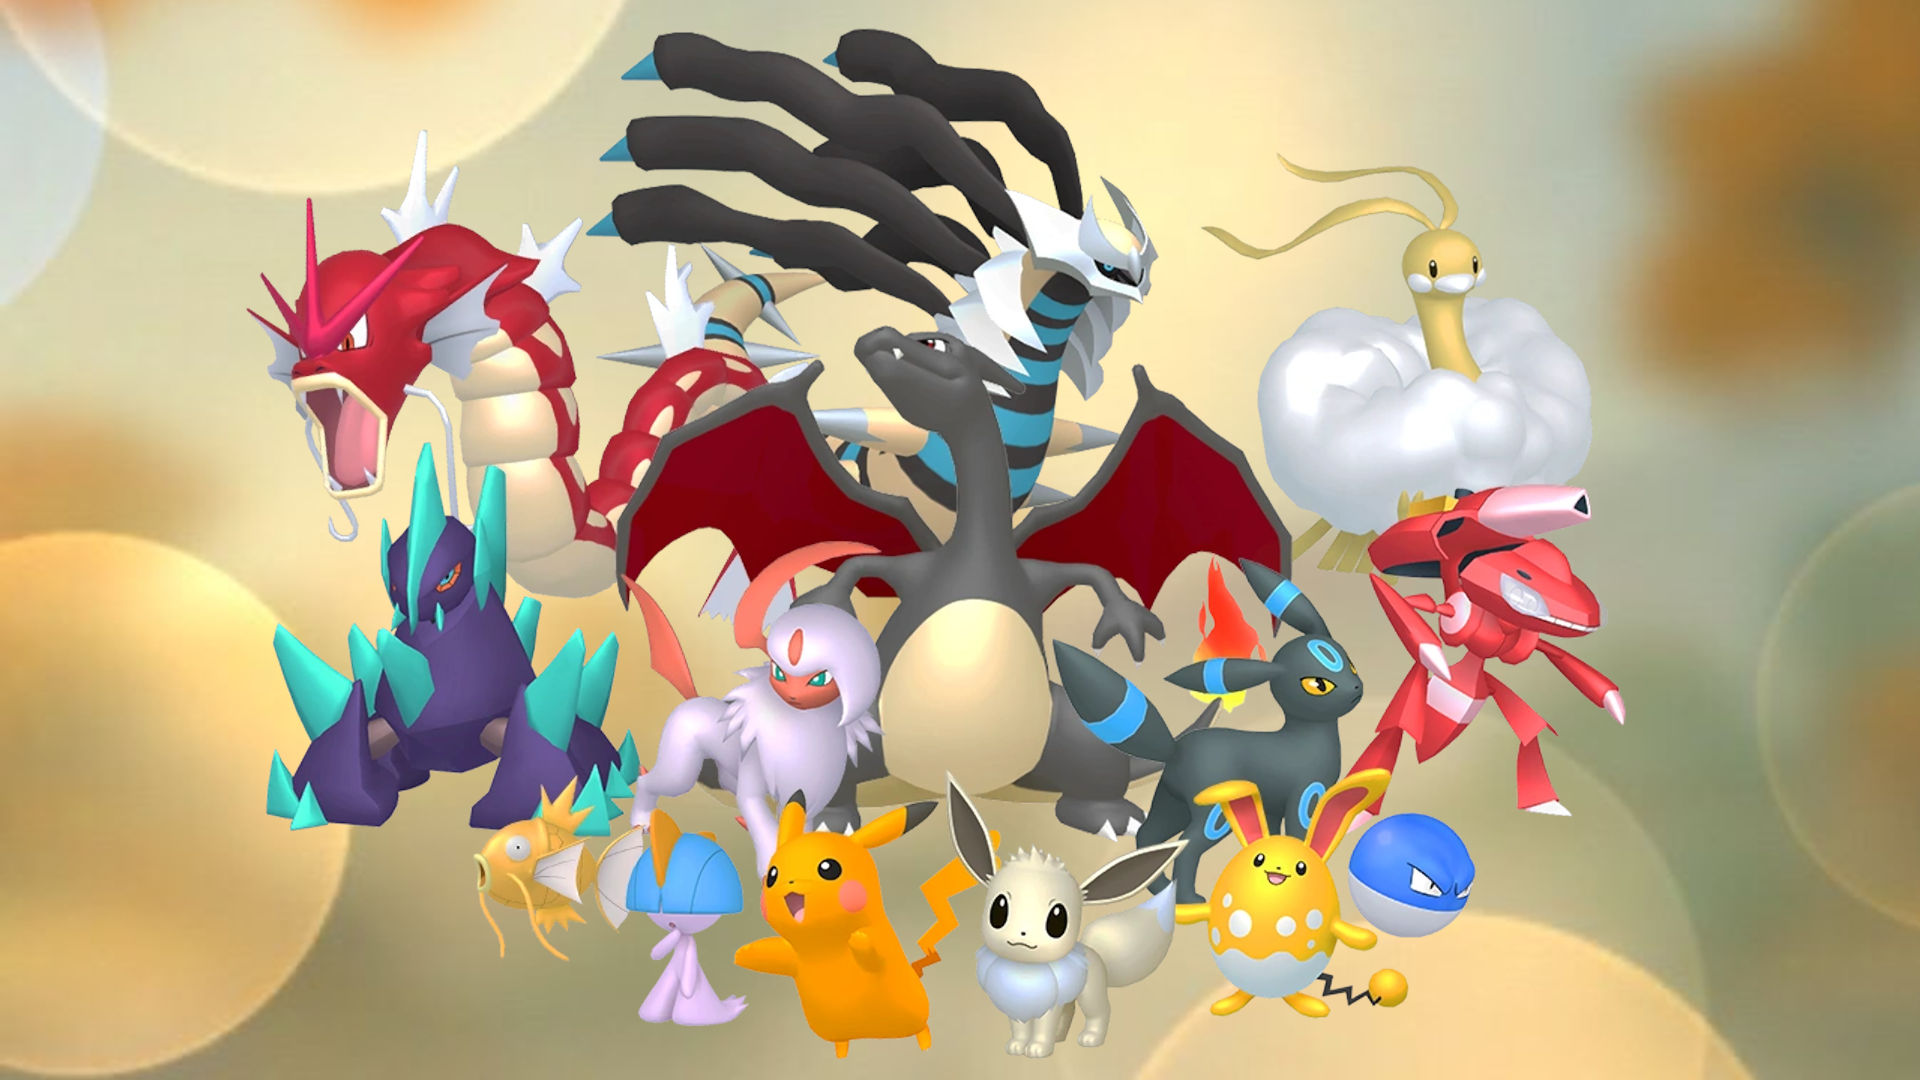 List of Shiny Pokemon in Pokémon GO and where to find them